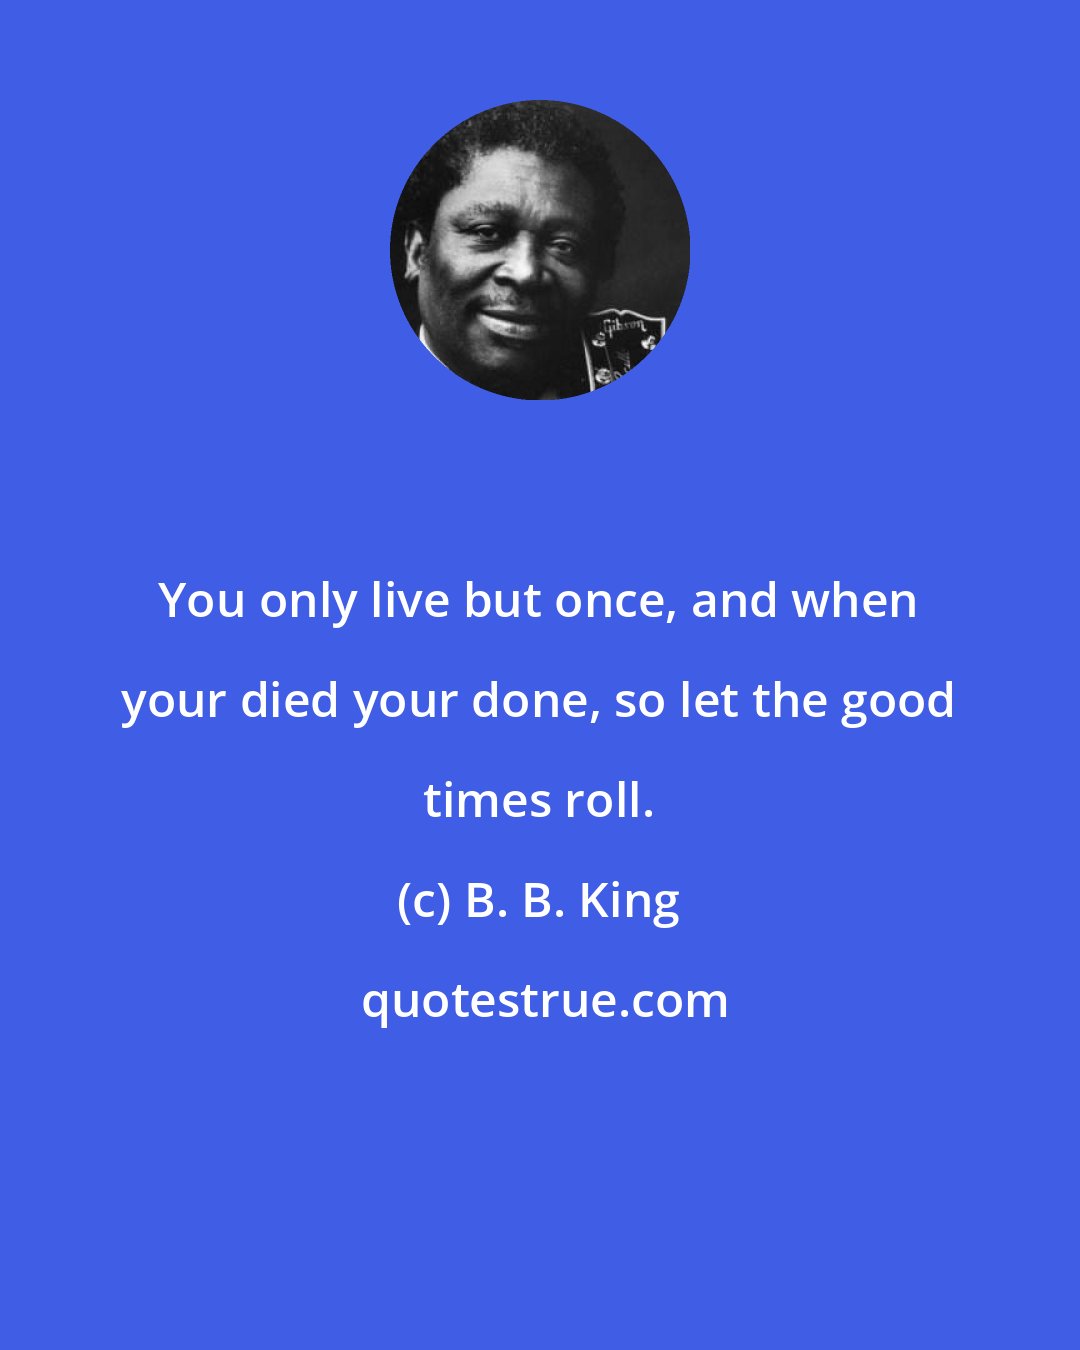 B. B. King: You only live but once, and when your died your done, so let the good times roll.